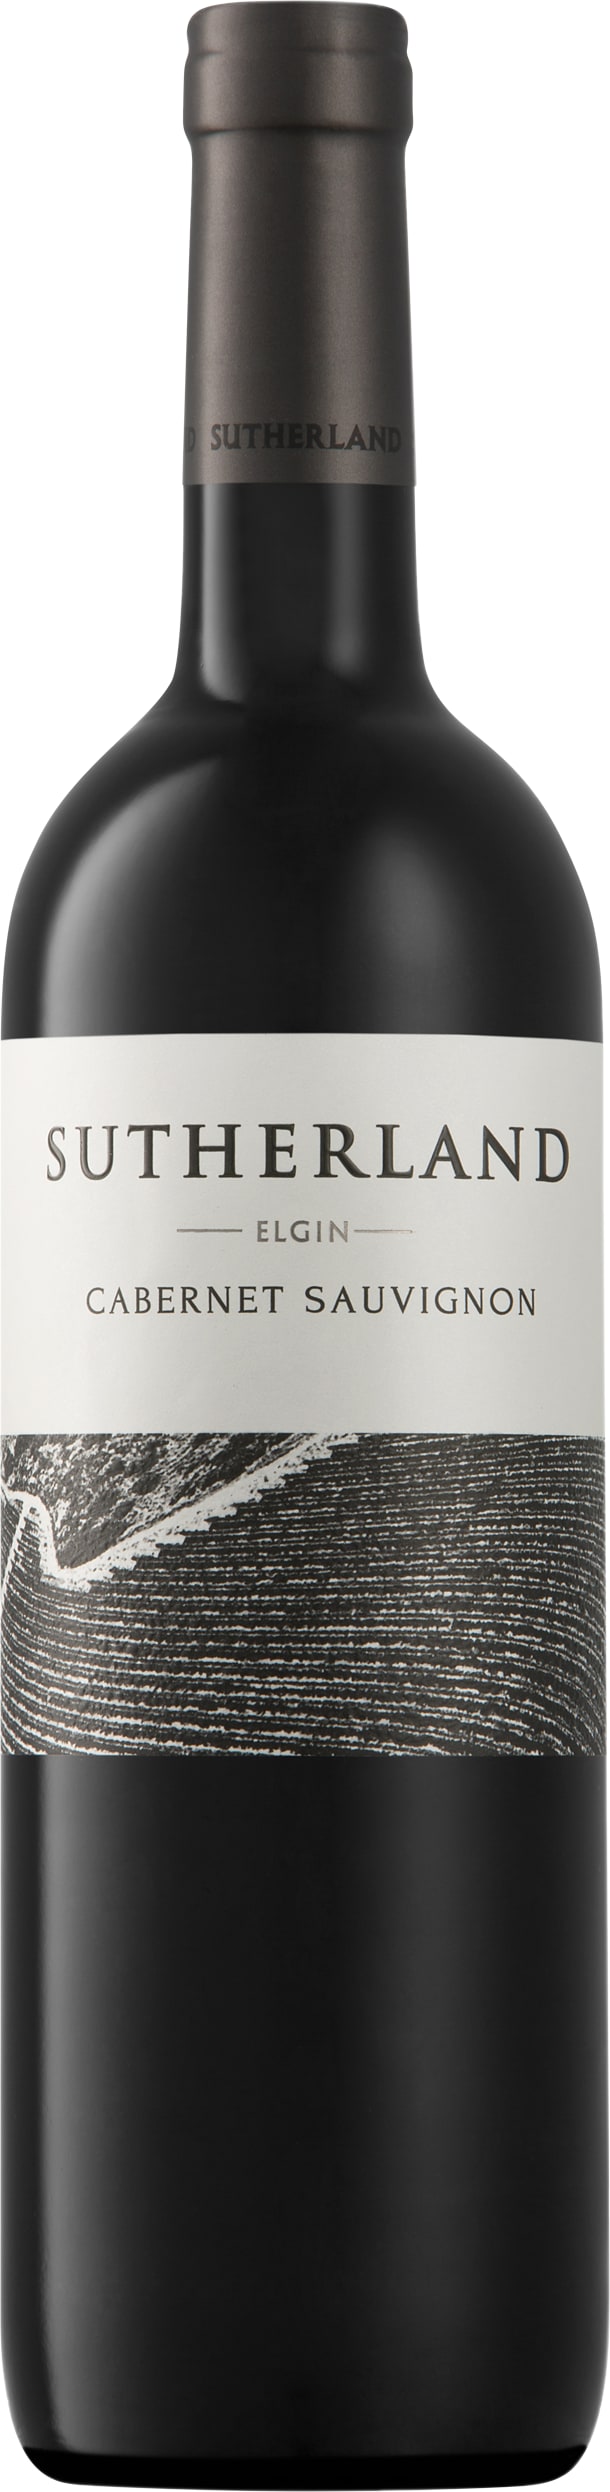 Thelema Mountain Vineyards Sutherland Cabernet Sauvignon 2019 75cl - Buy Thelema Mountain Vineyards Wines from GREAT WINES DIRECT wine shop